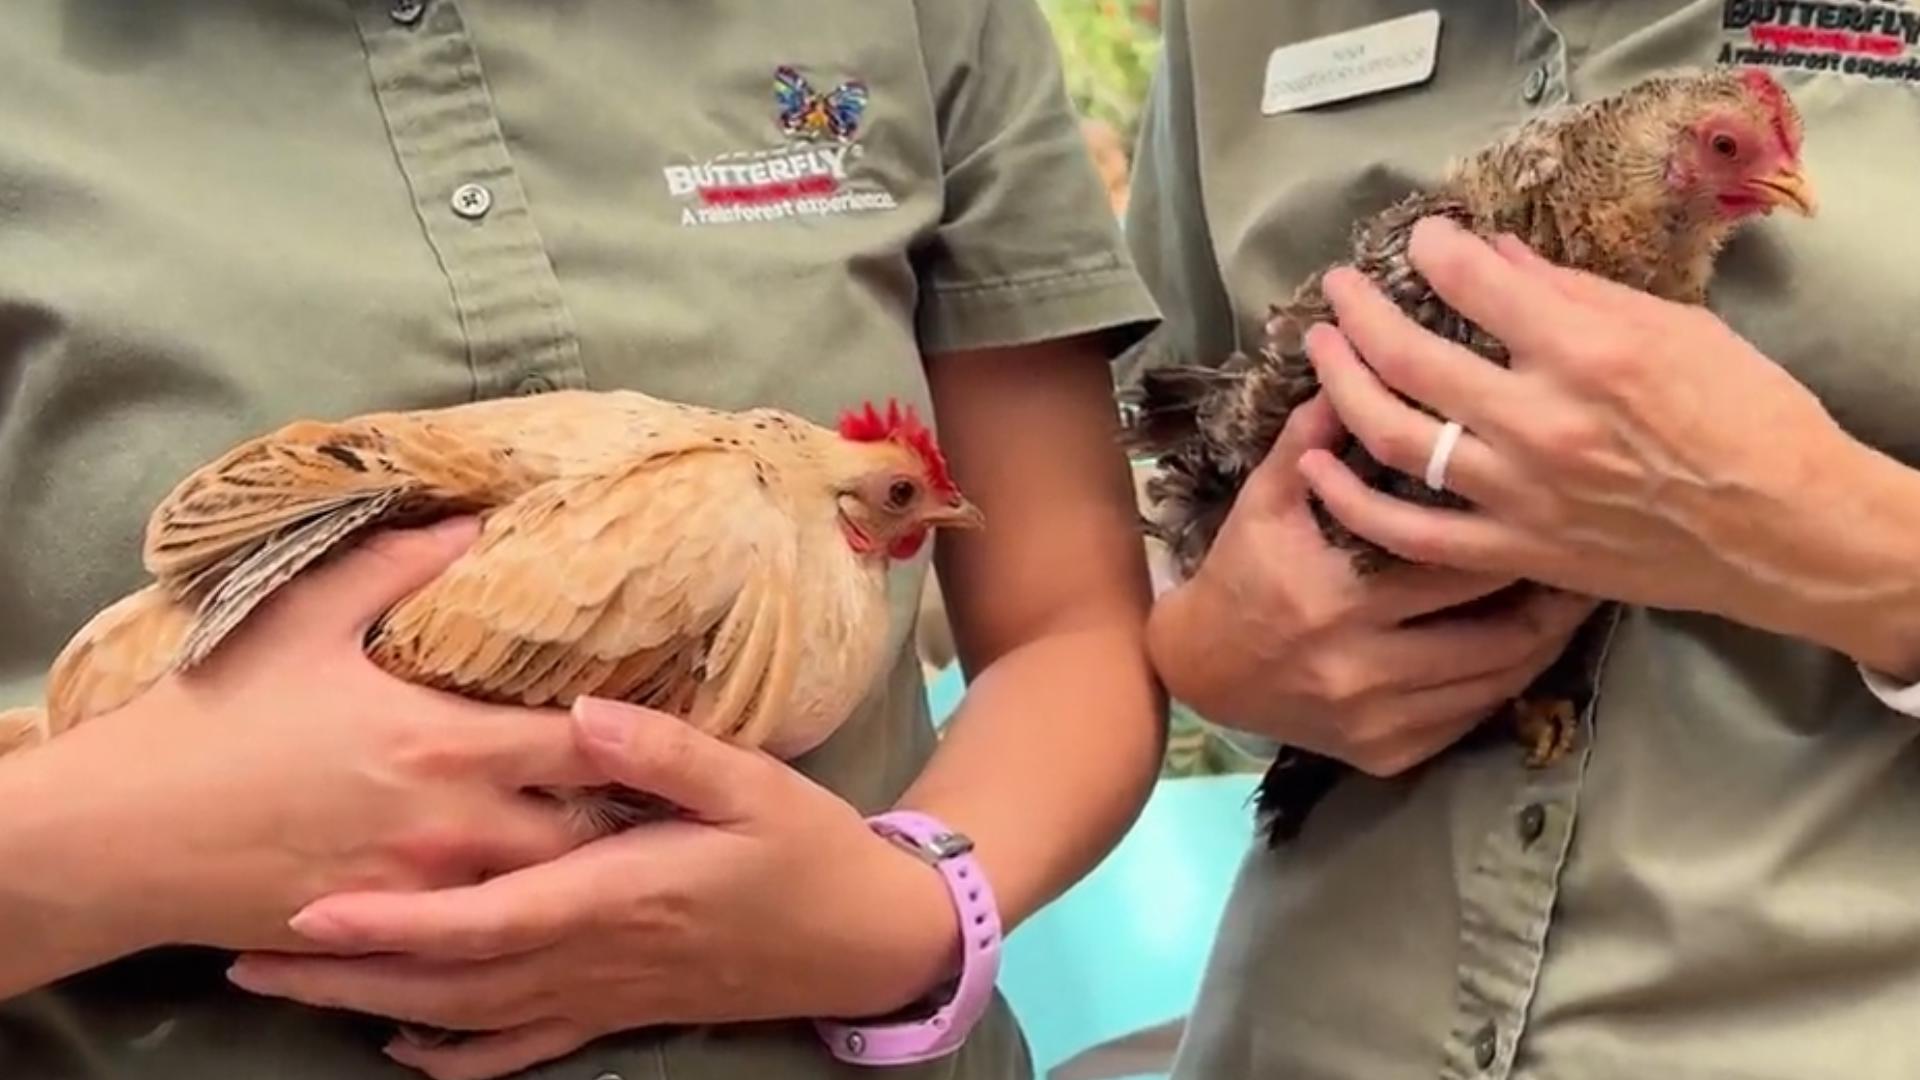 The popular conservatory chickens are headed to greener pastures to live out the rest of their days.